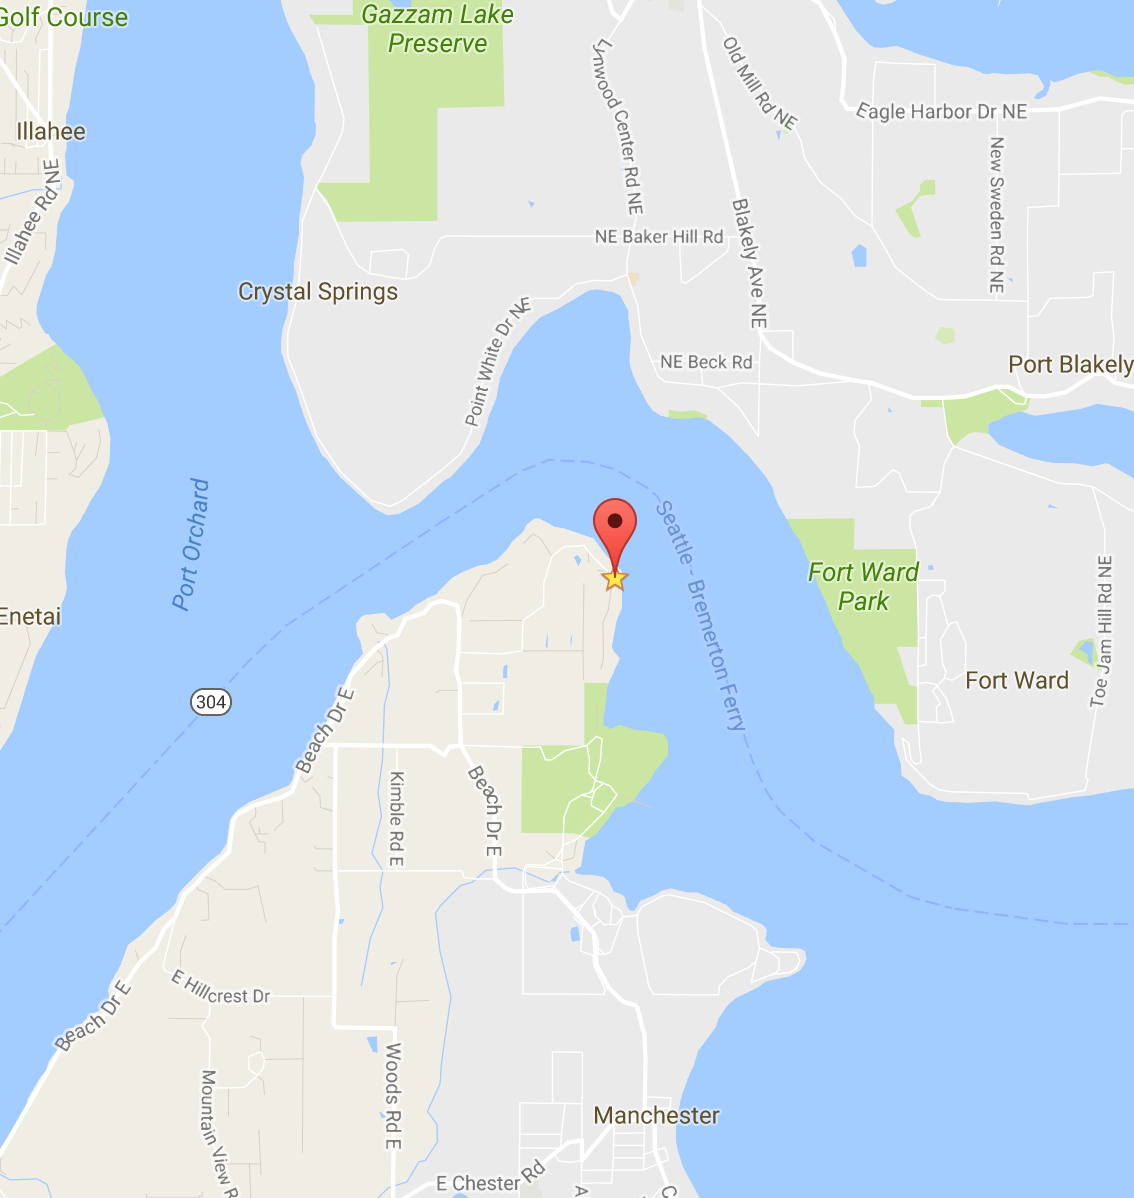 Location of the cottage I stayed in on Puget Sound.